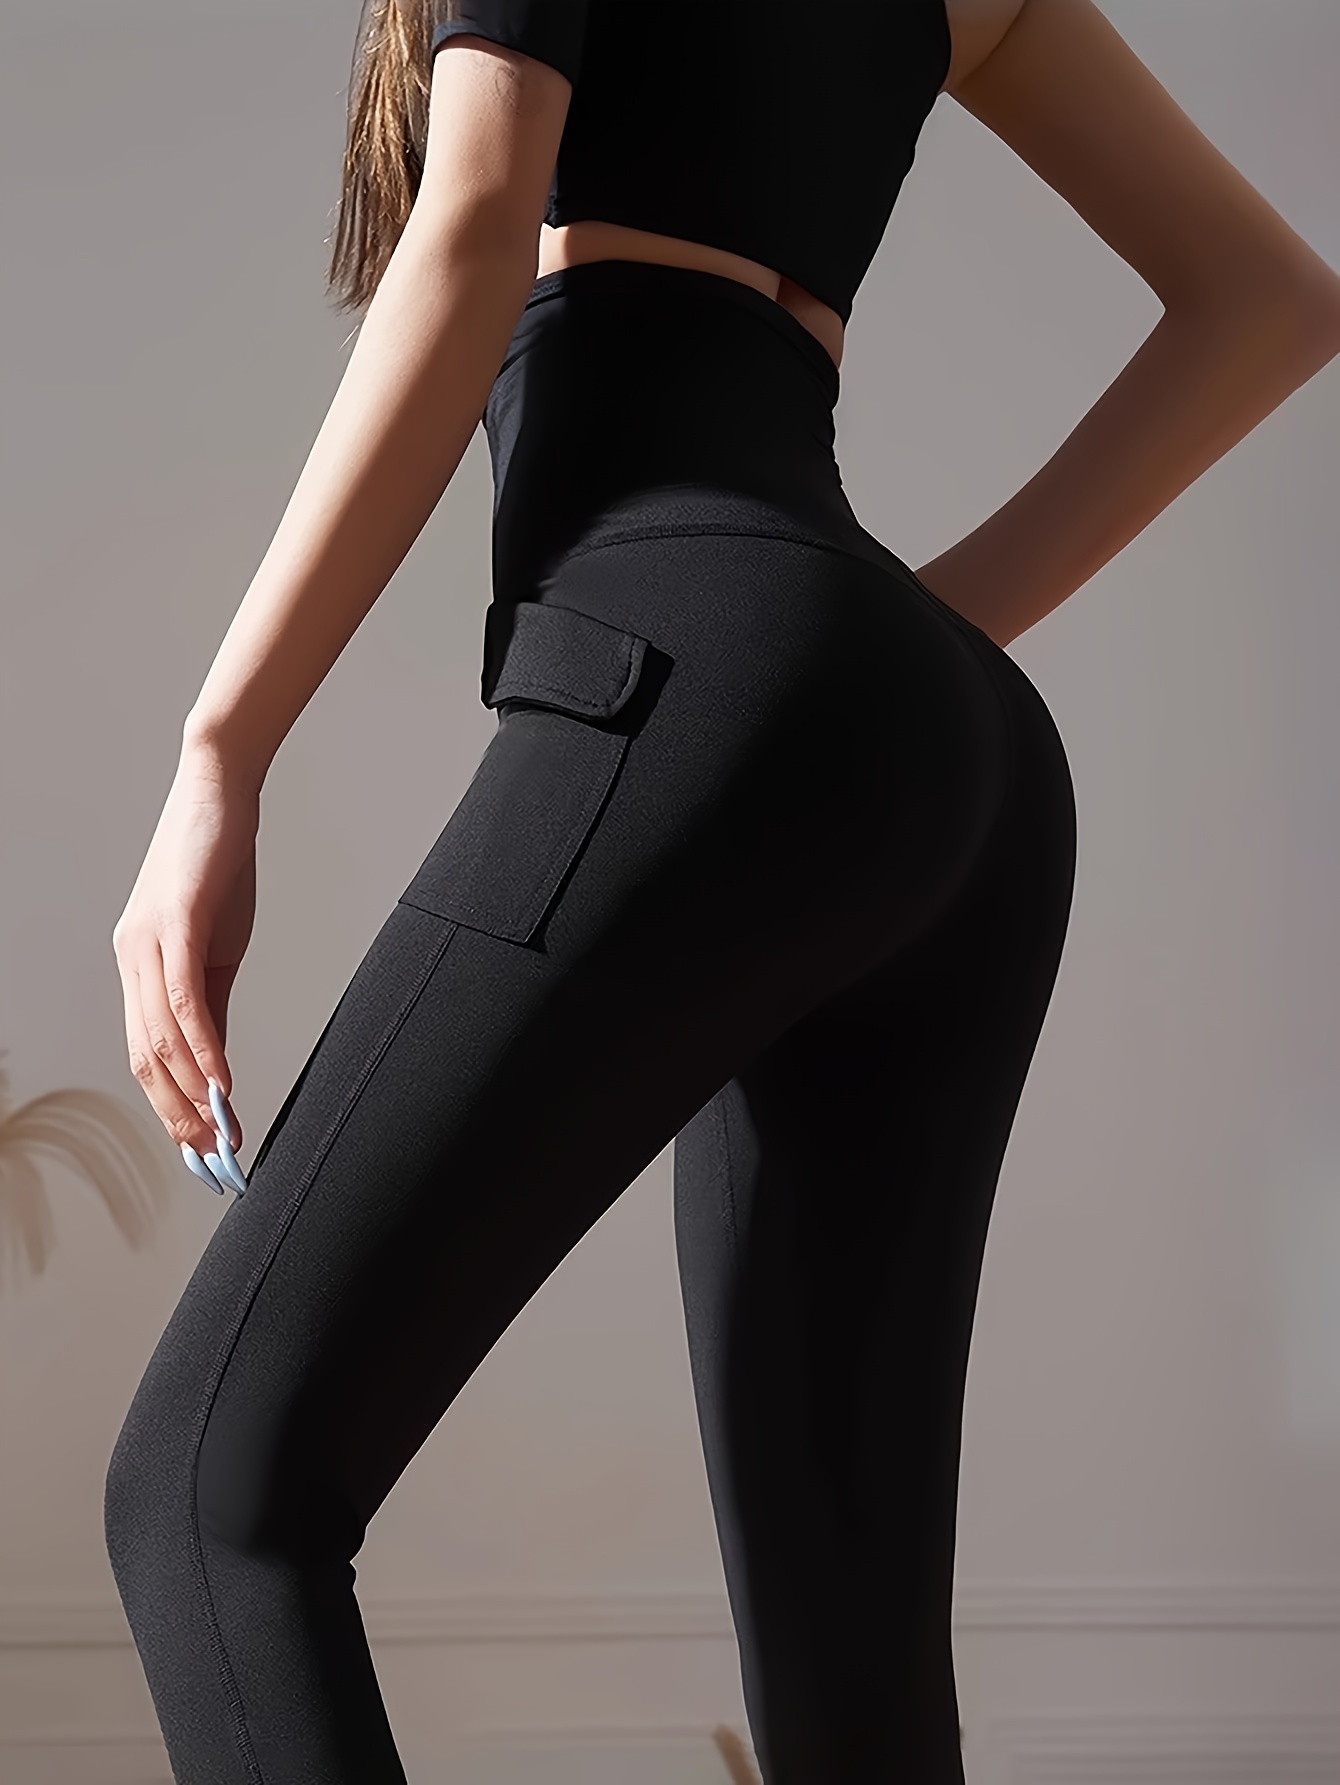 Buy Black Leggings for Women Non See Through-High Waisted Workout